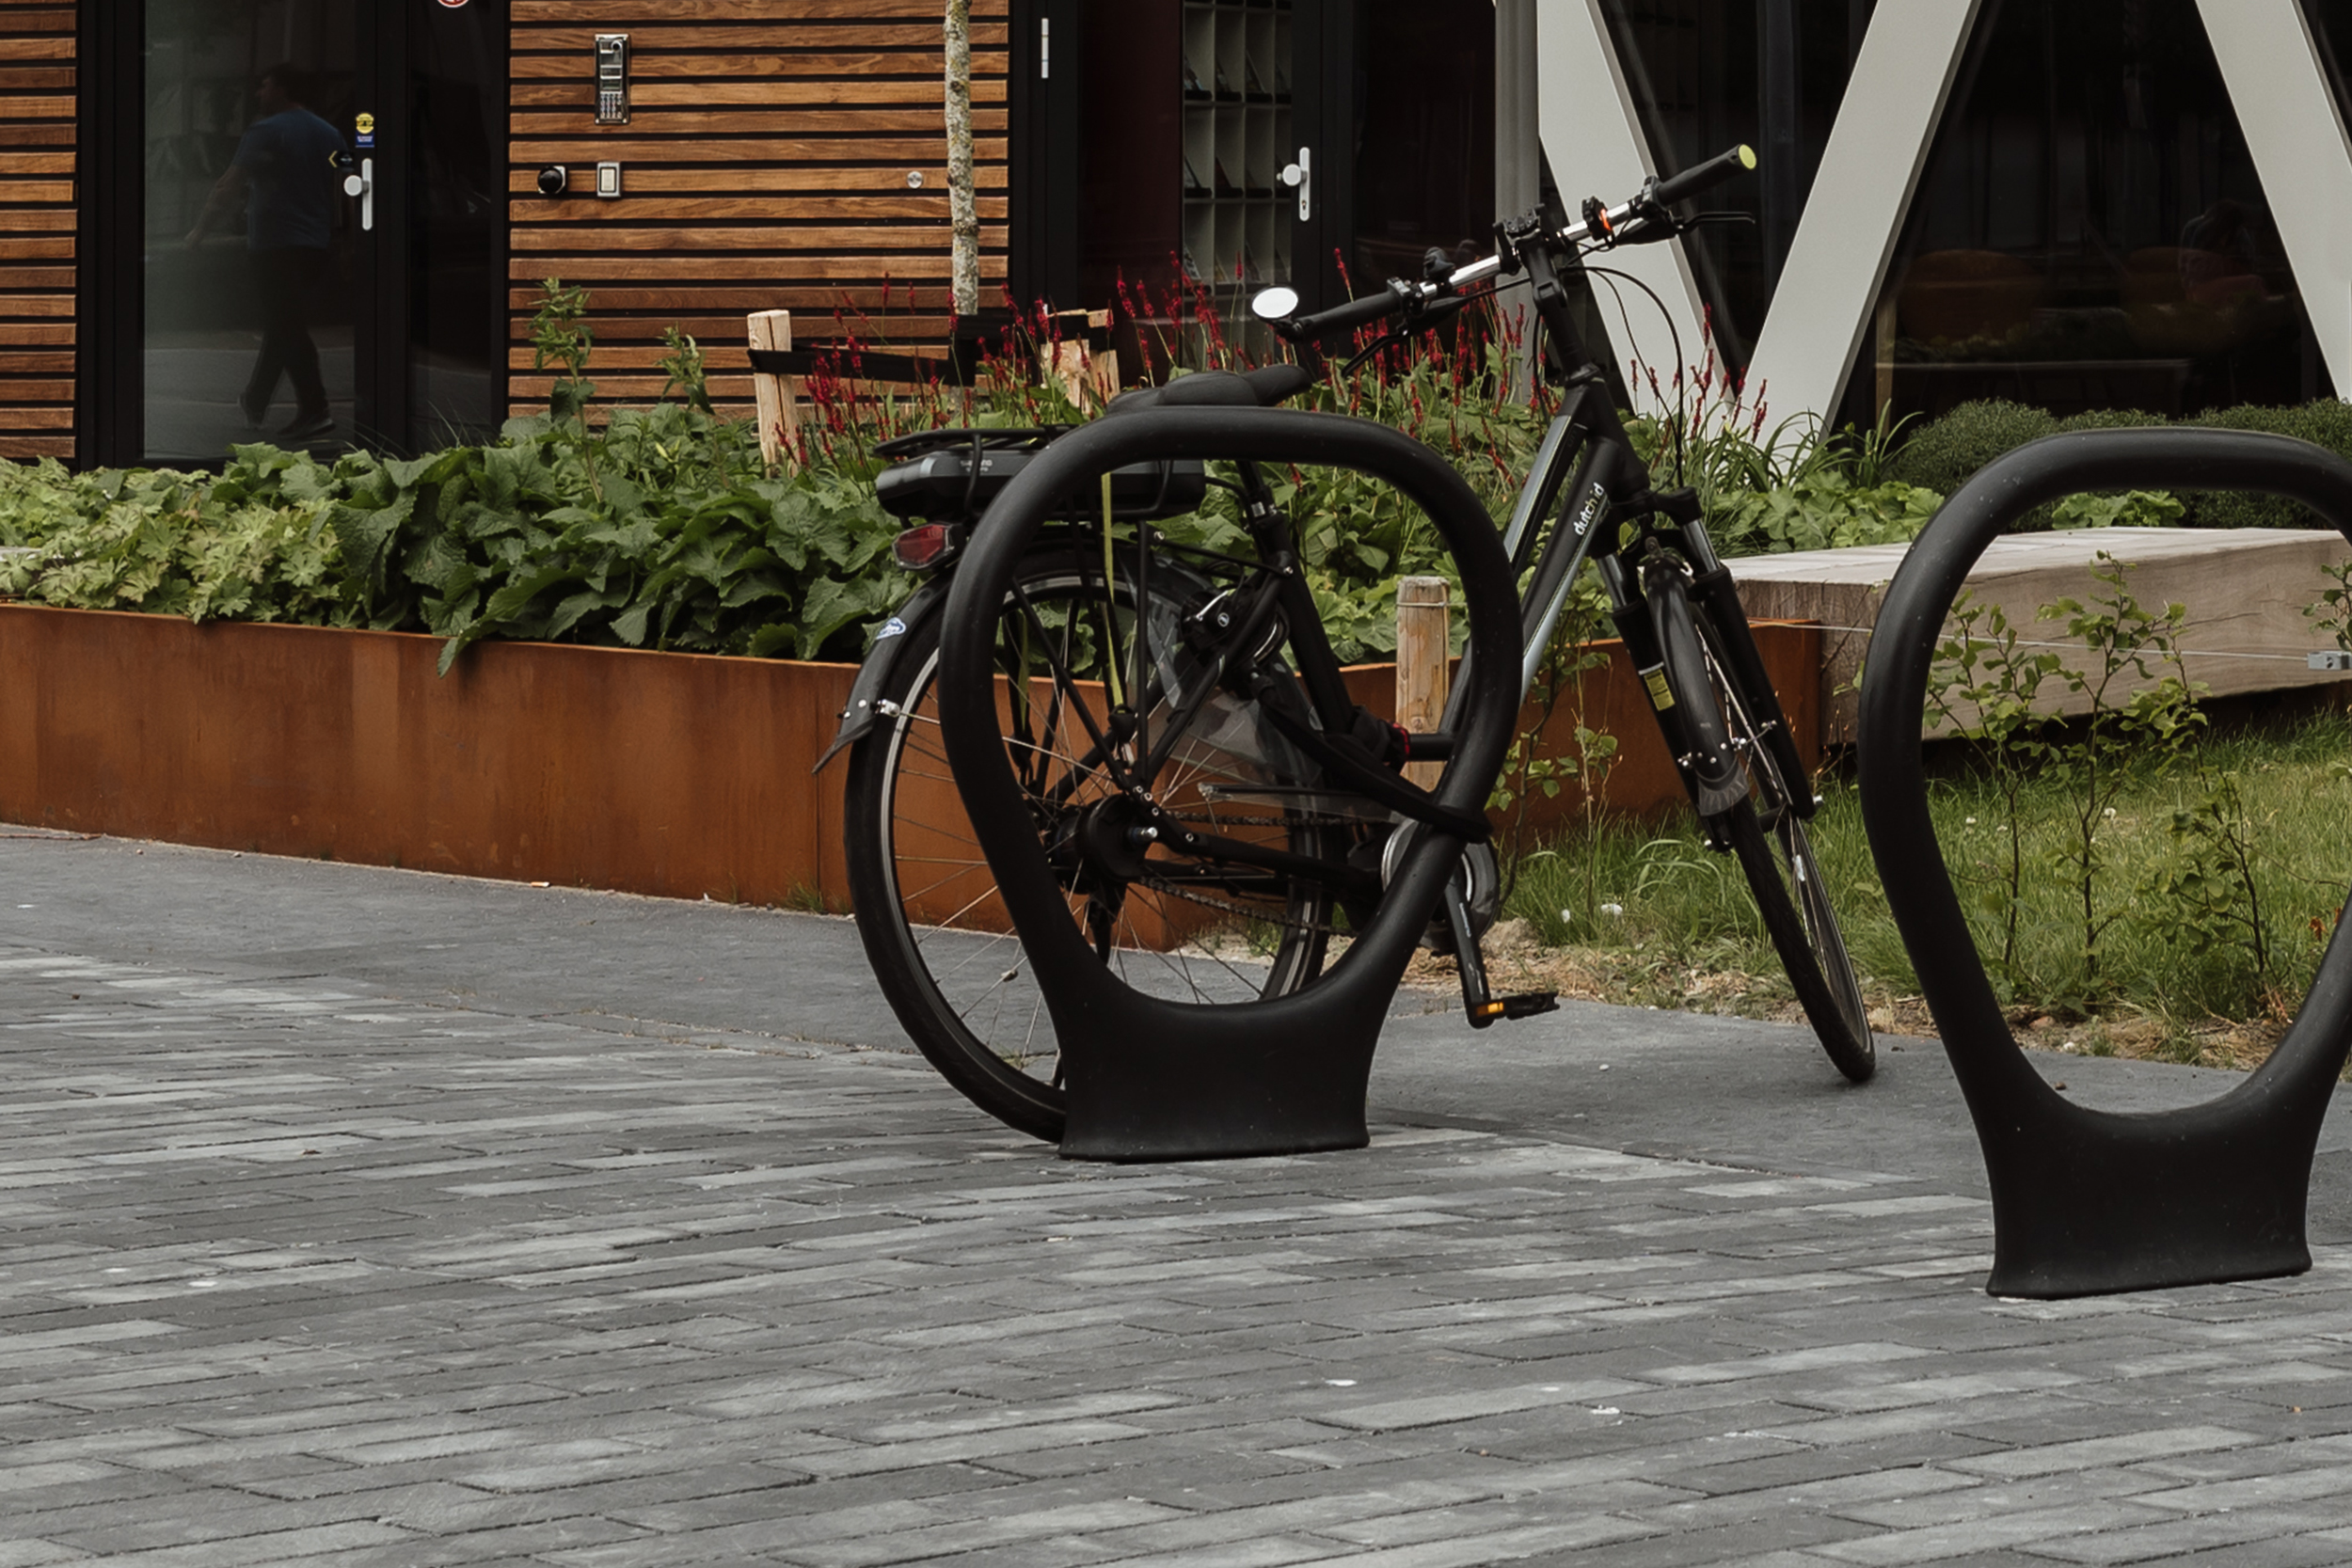 Durbanis design firm manufactures bicycle racks in recycled polyethylene